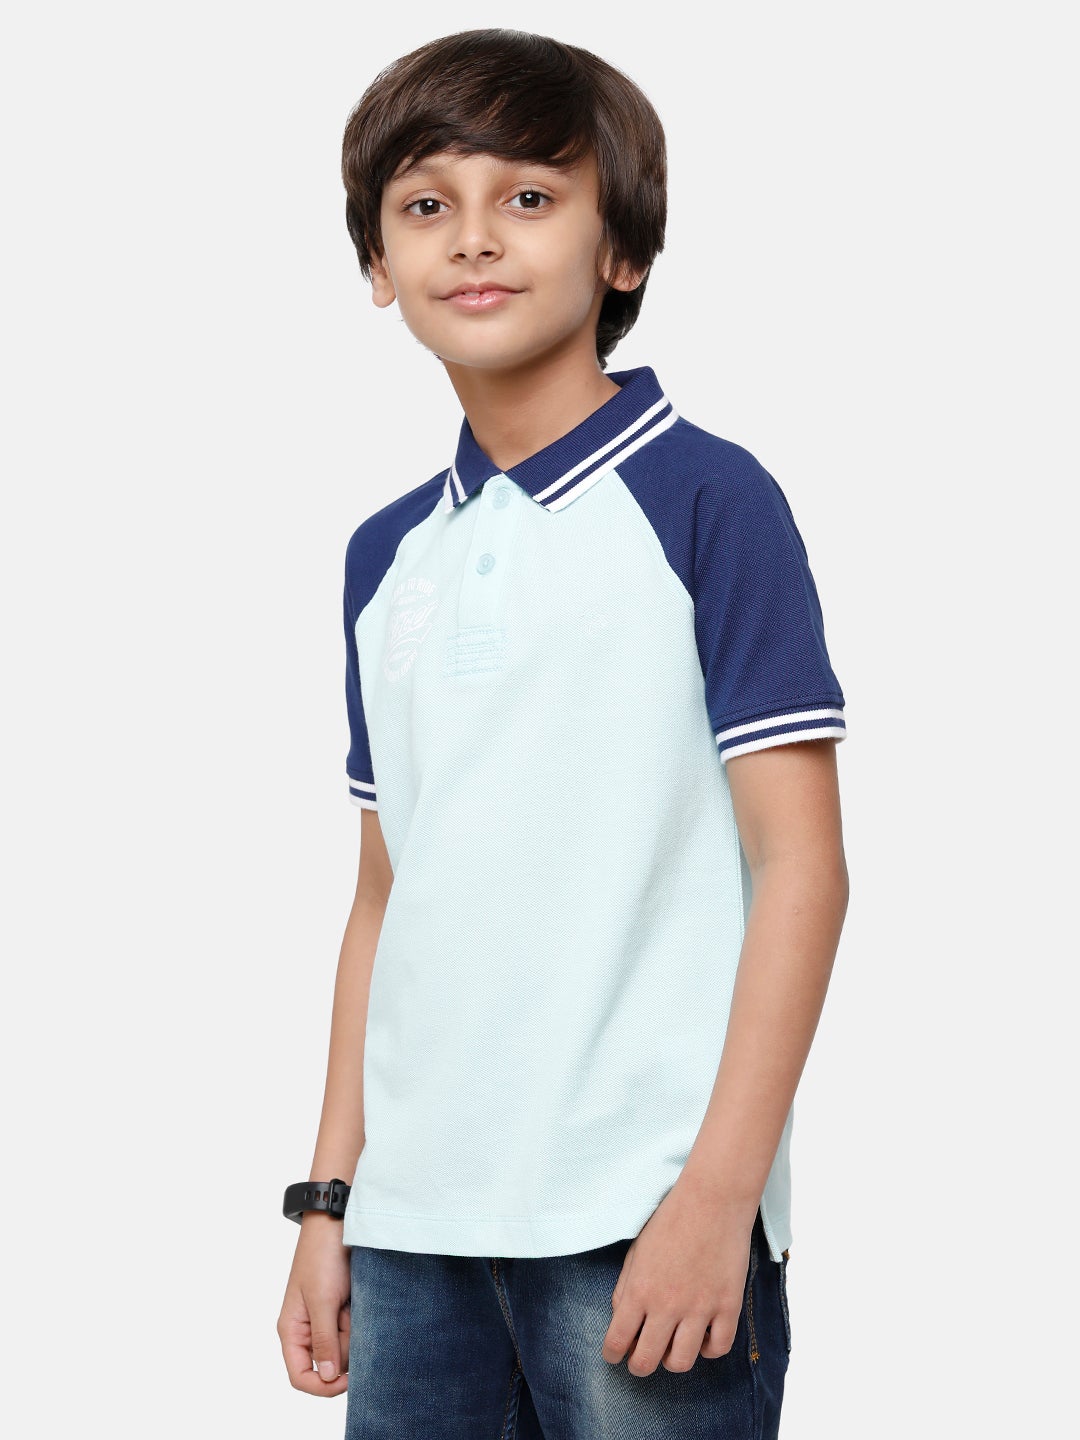 CP Boys White & Blue Solid Slim Fit Polo Neck T-Shirt T-shirt Classic Polo 